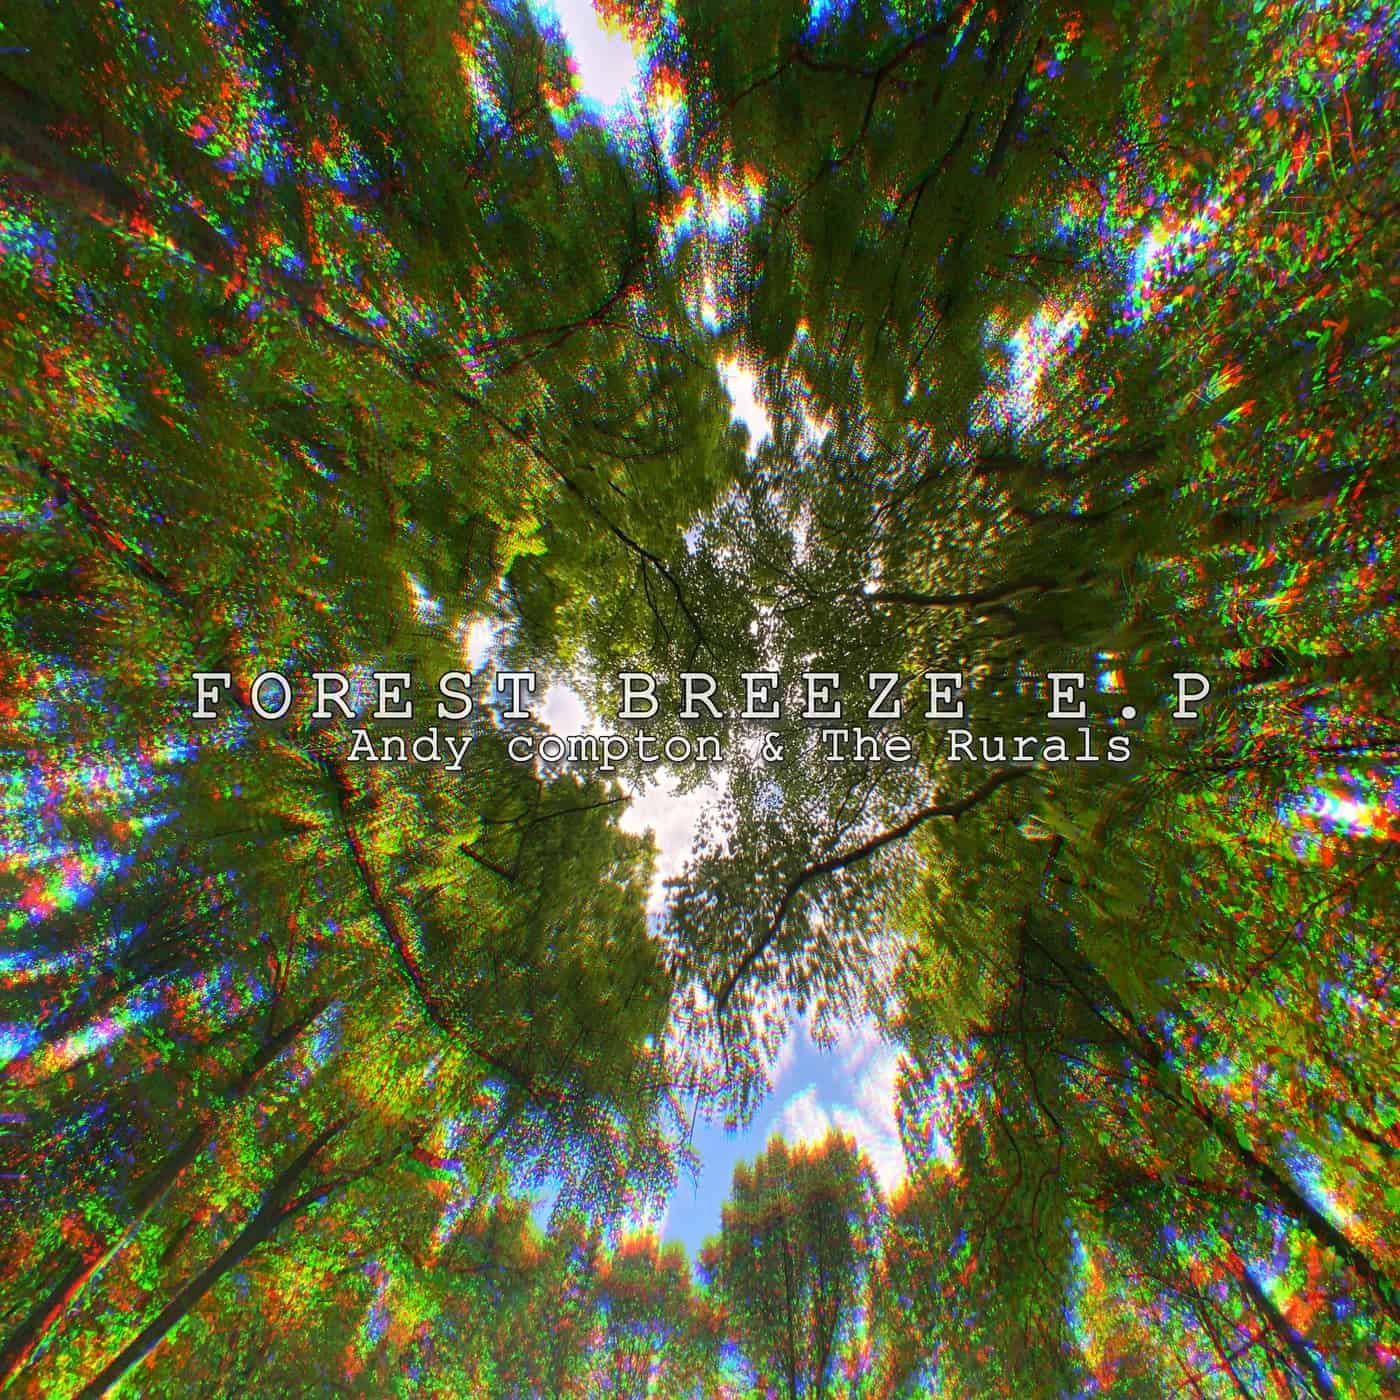 Download The Rurals, Andy Compton - Forest Breeze E.P on Electrobuzz